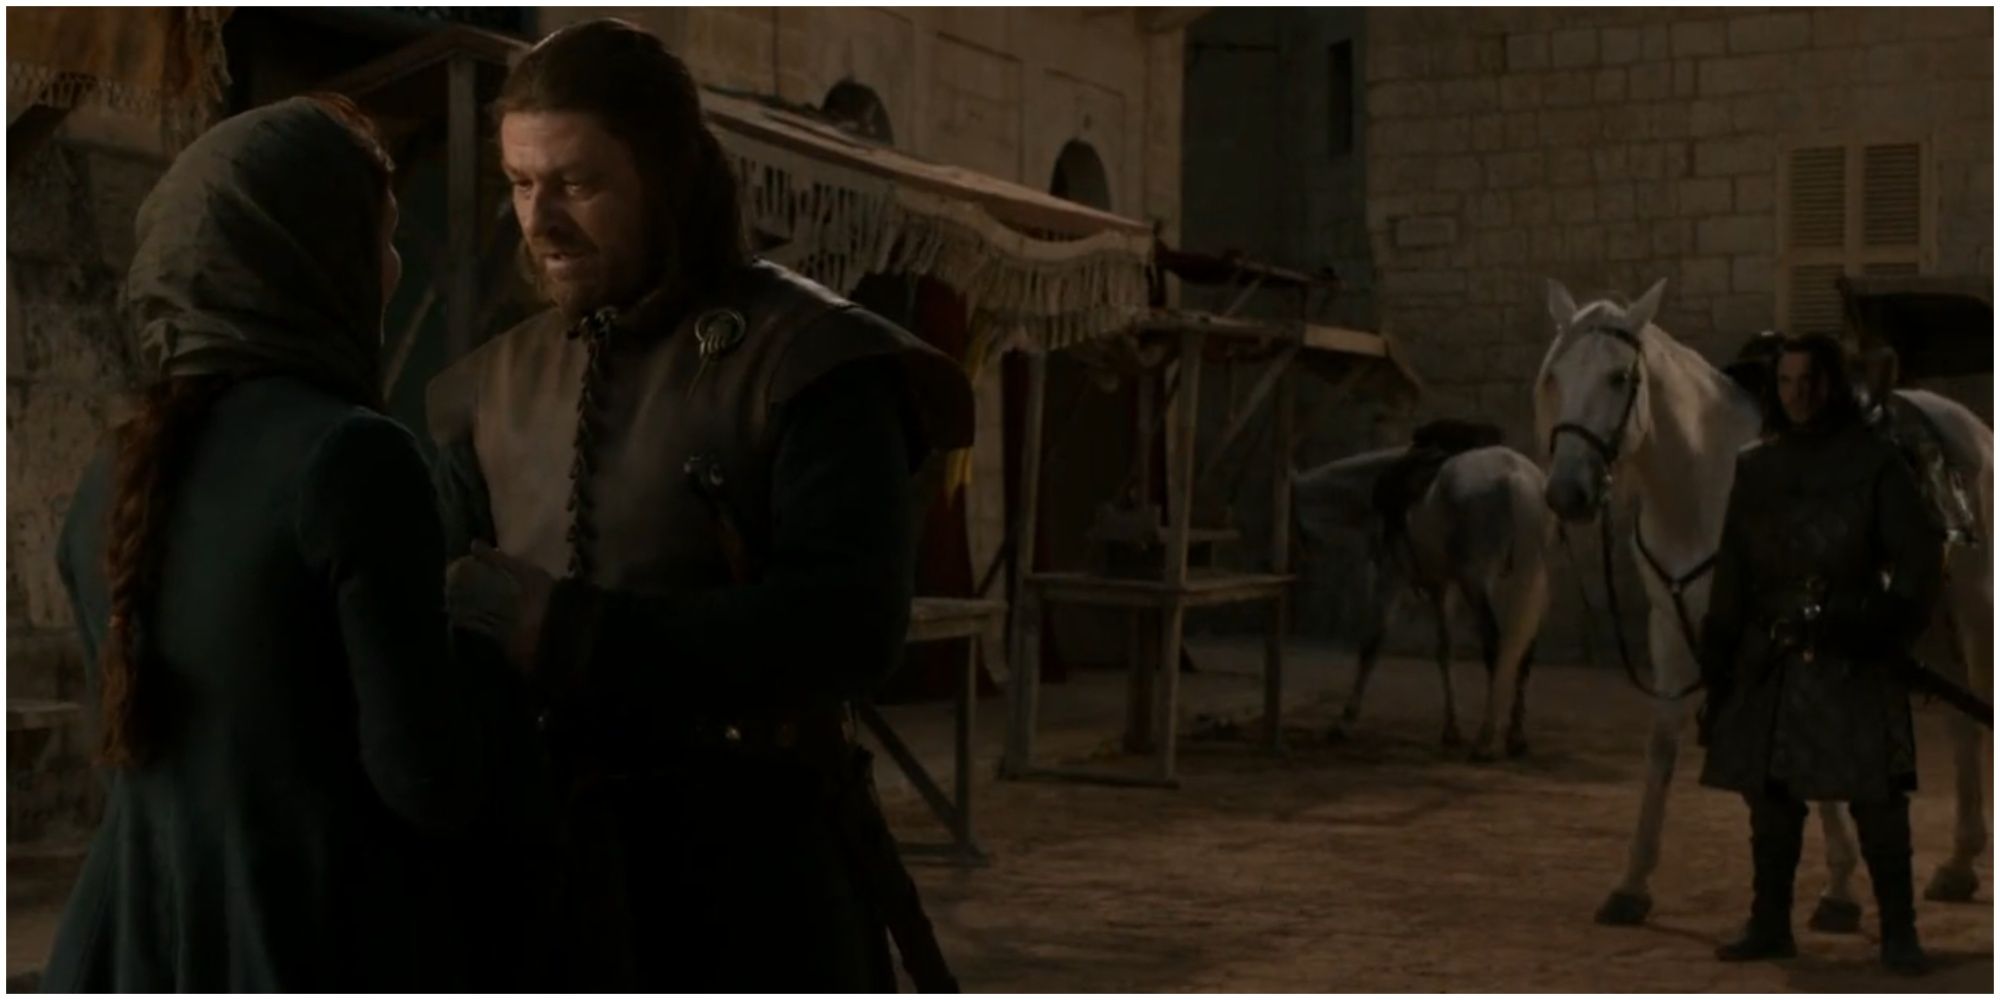 Catelyn and Ned in King's Landing in Game of Thrones.